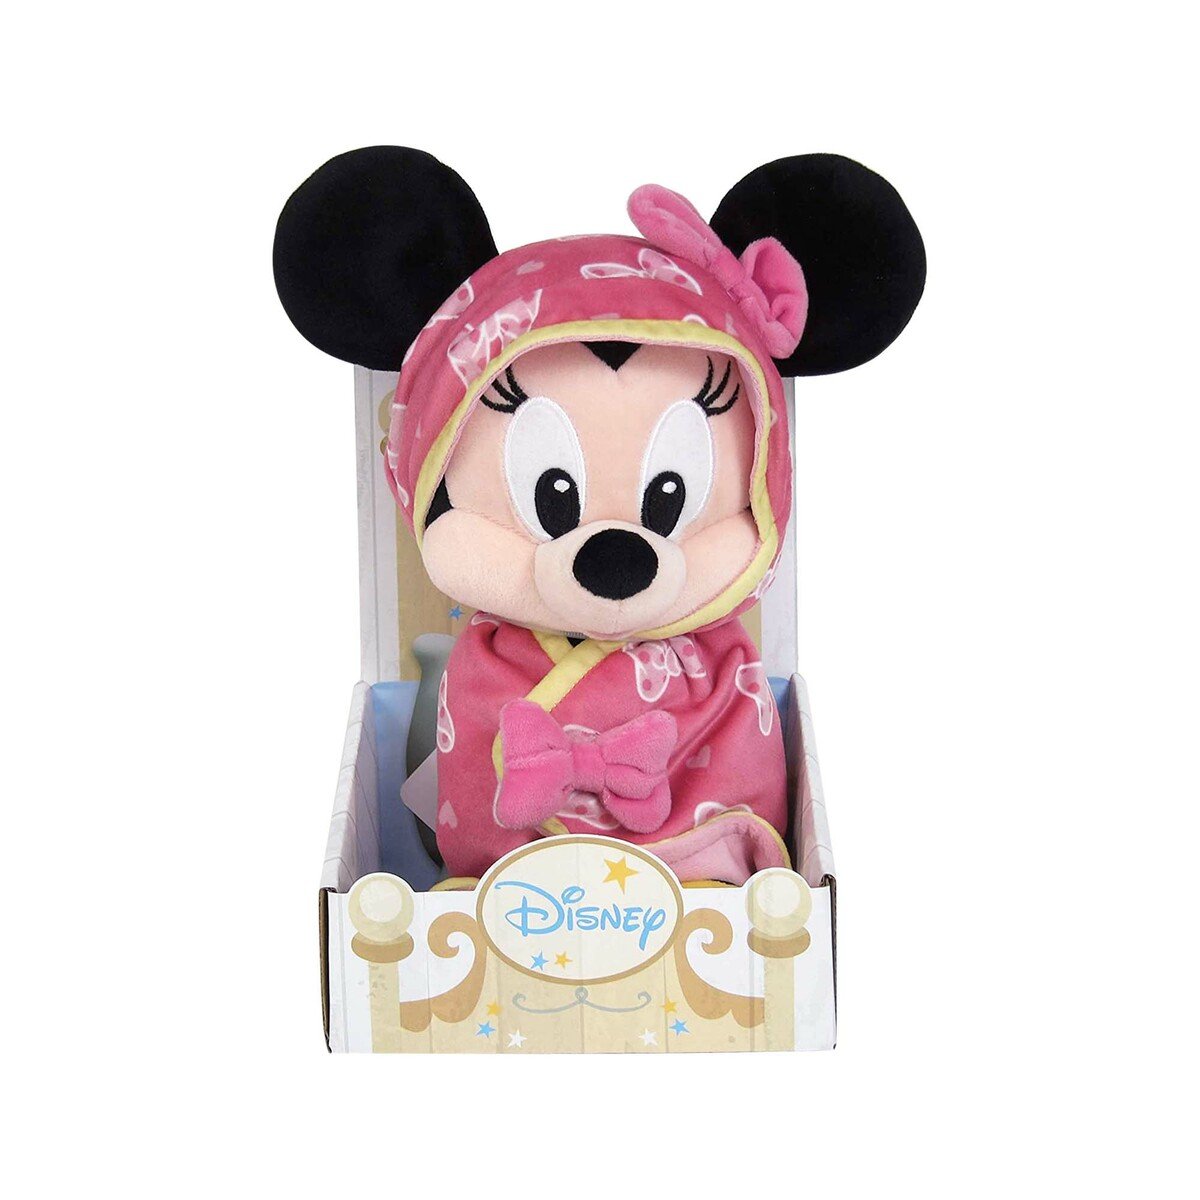 Disney Plush Minnie Blanket With Stand 10" PDP1601599